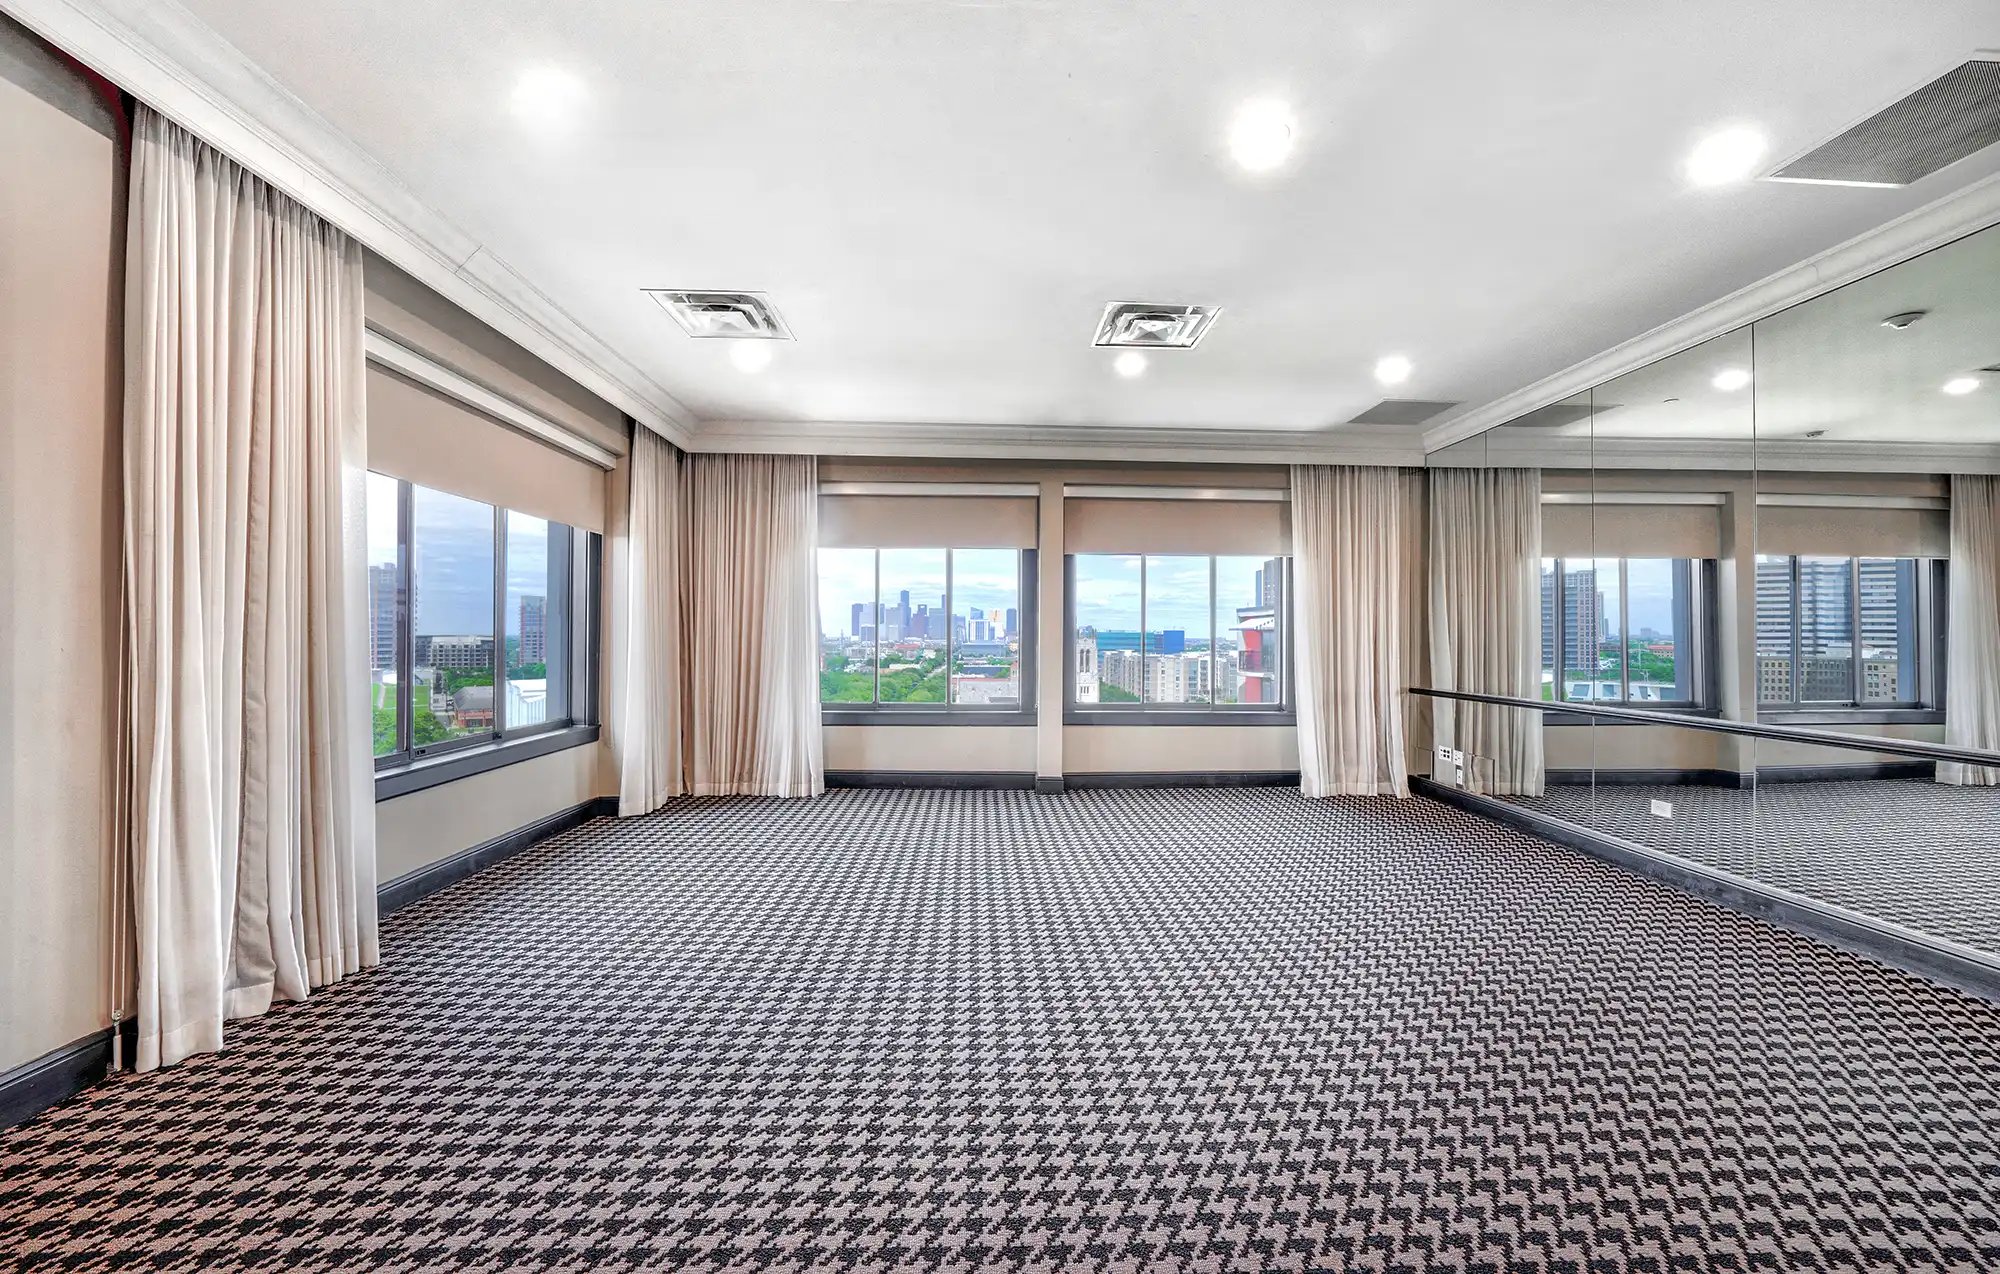 Hotel ZaZa Houston Museum District Wedding Venues Room With A View 2